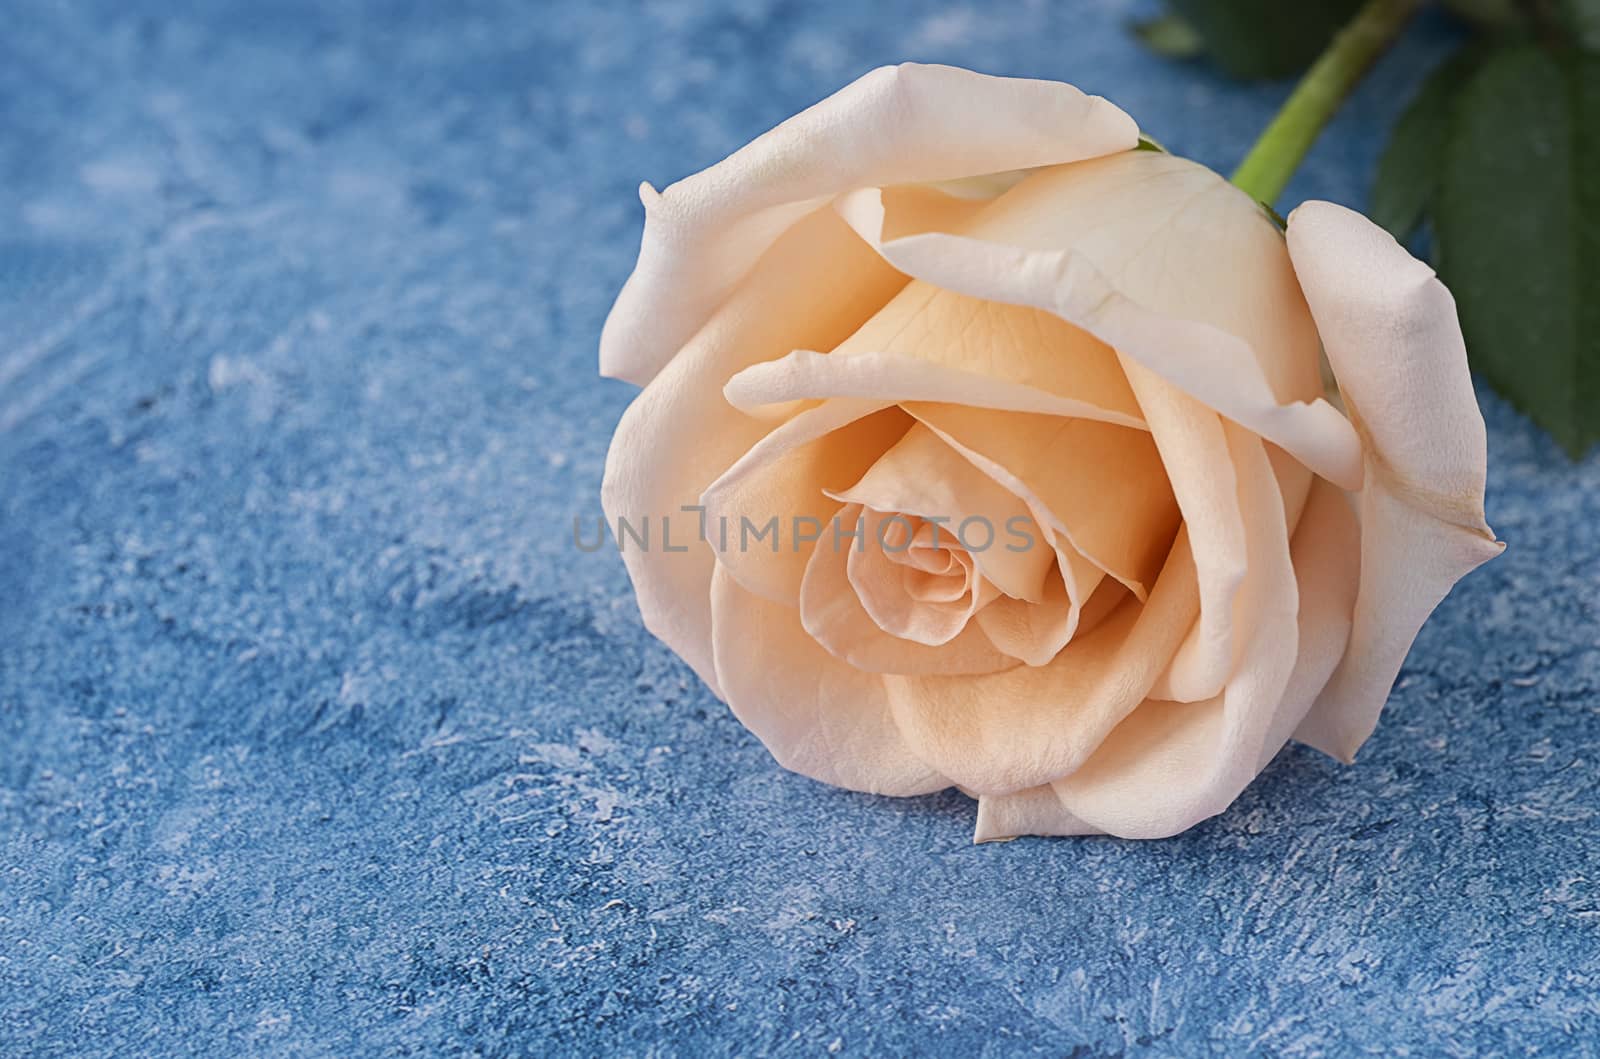 peach color rose on a blue and white acrylic paint background by Nawoot